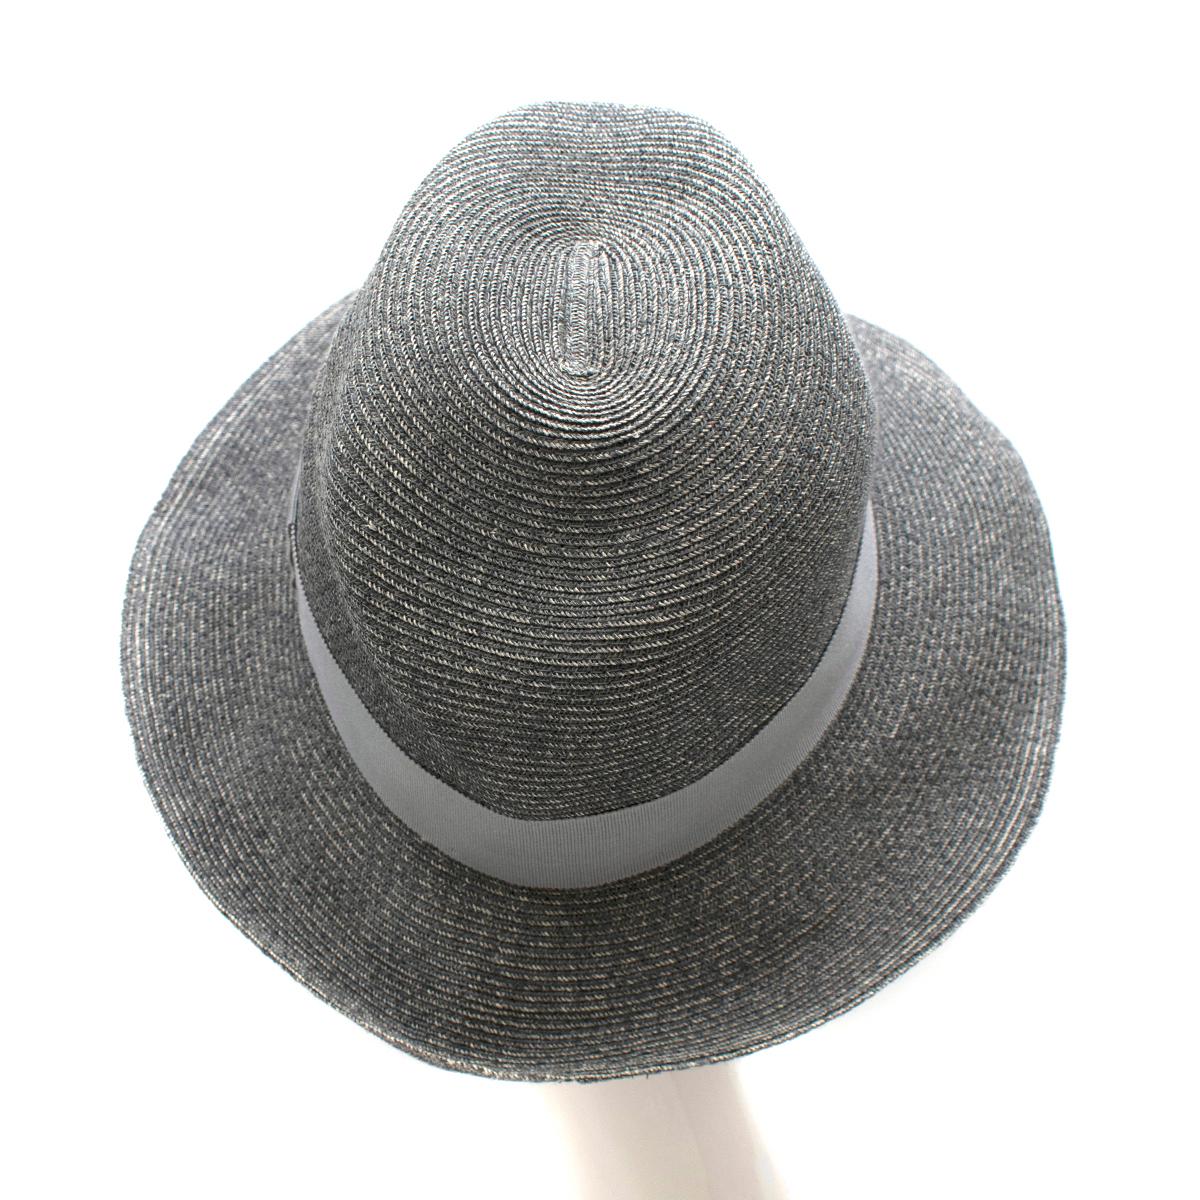 Hermes Paper Grey Summer Fedora Hat - Size 59 In Excellent Condition For Sale In London, GB